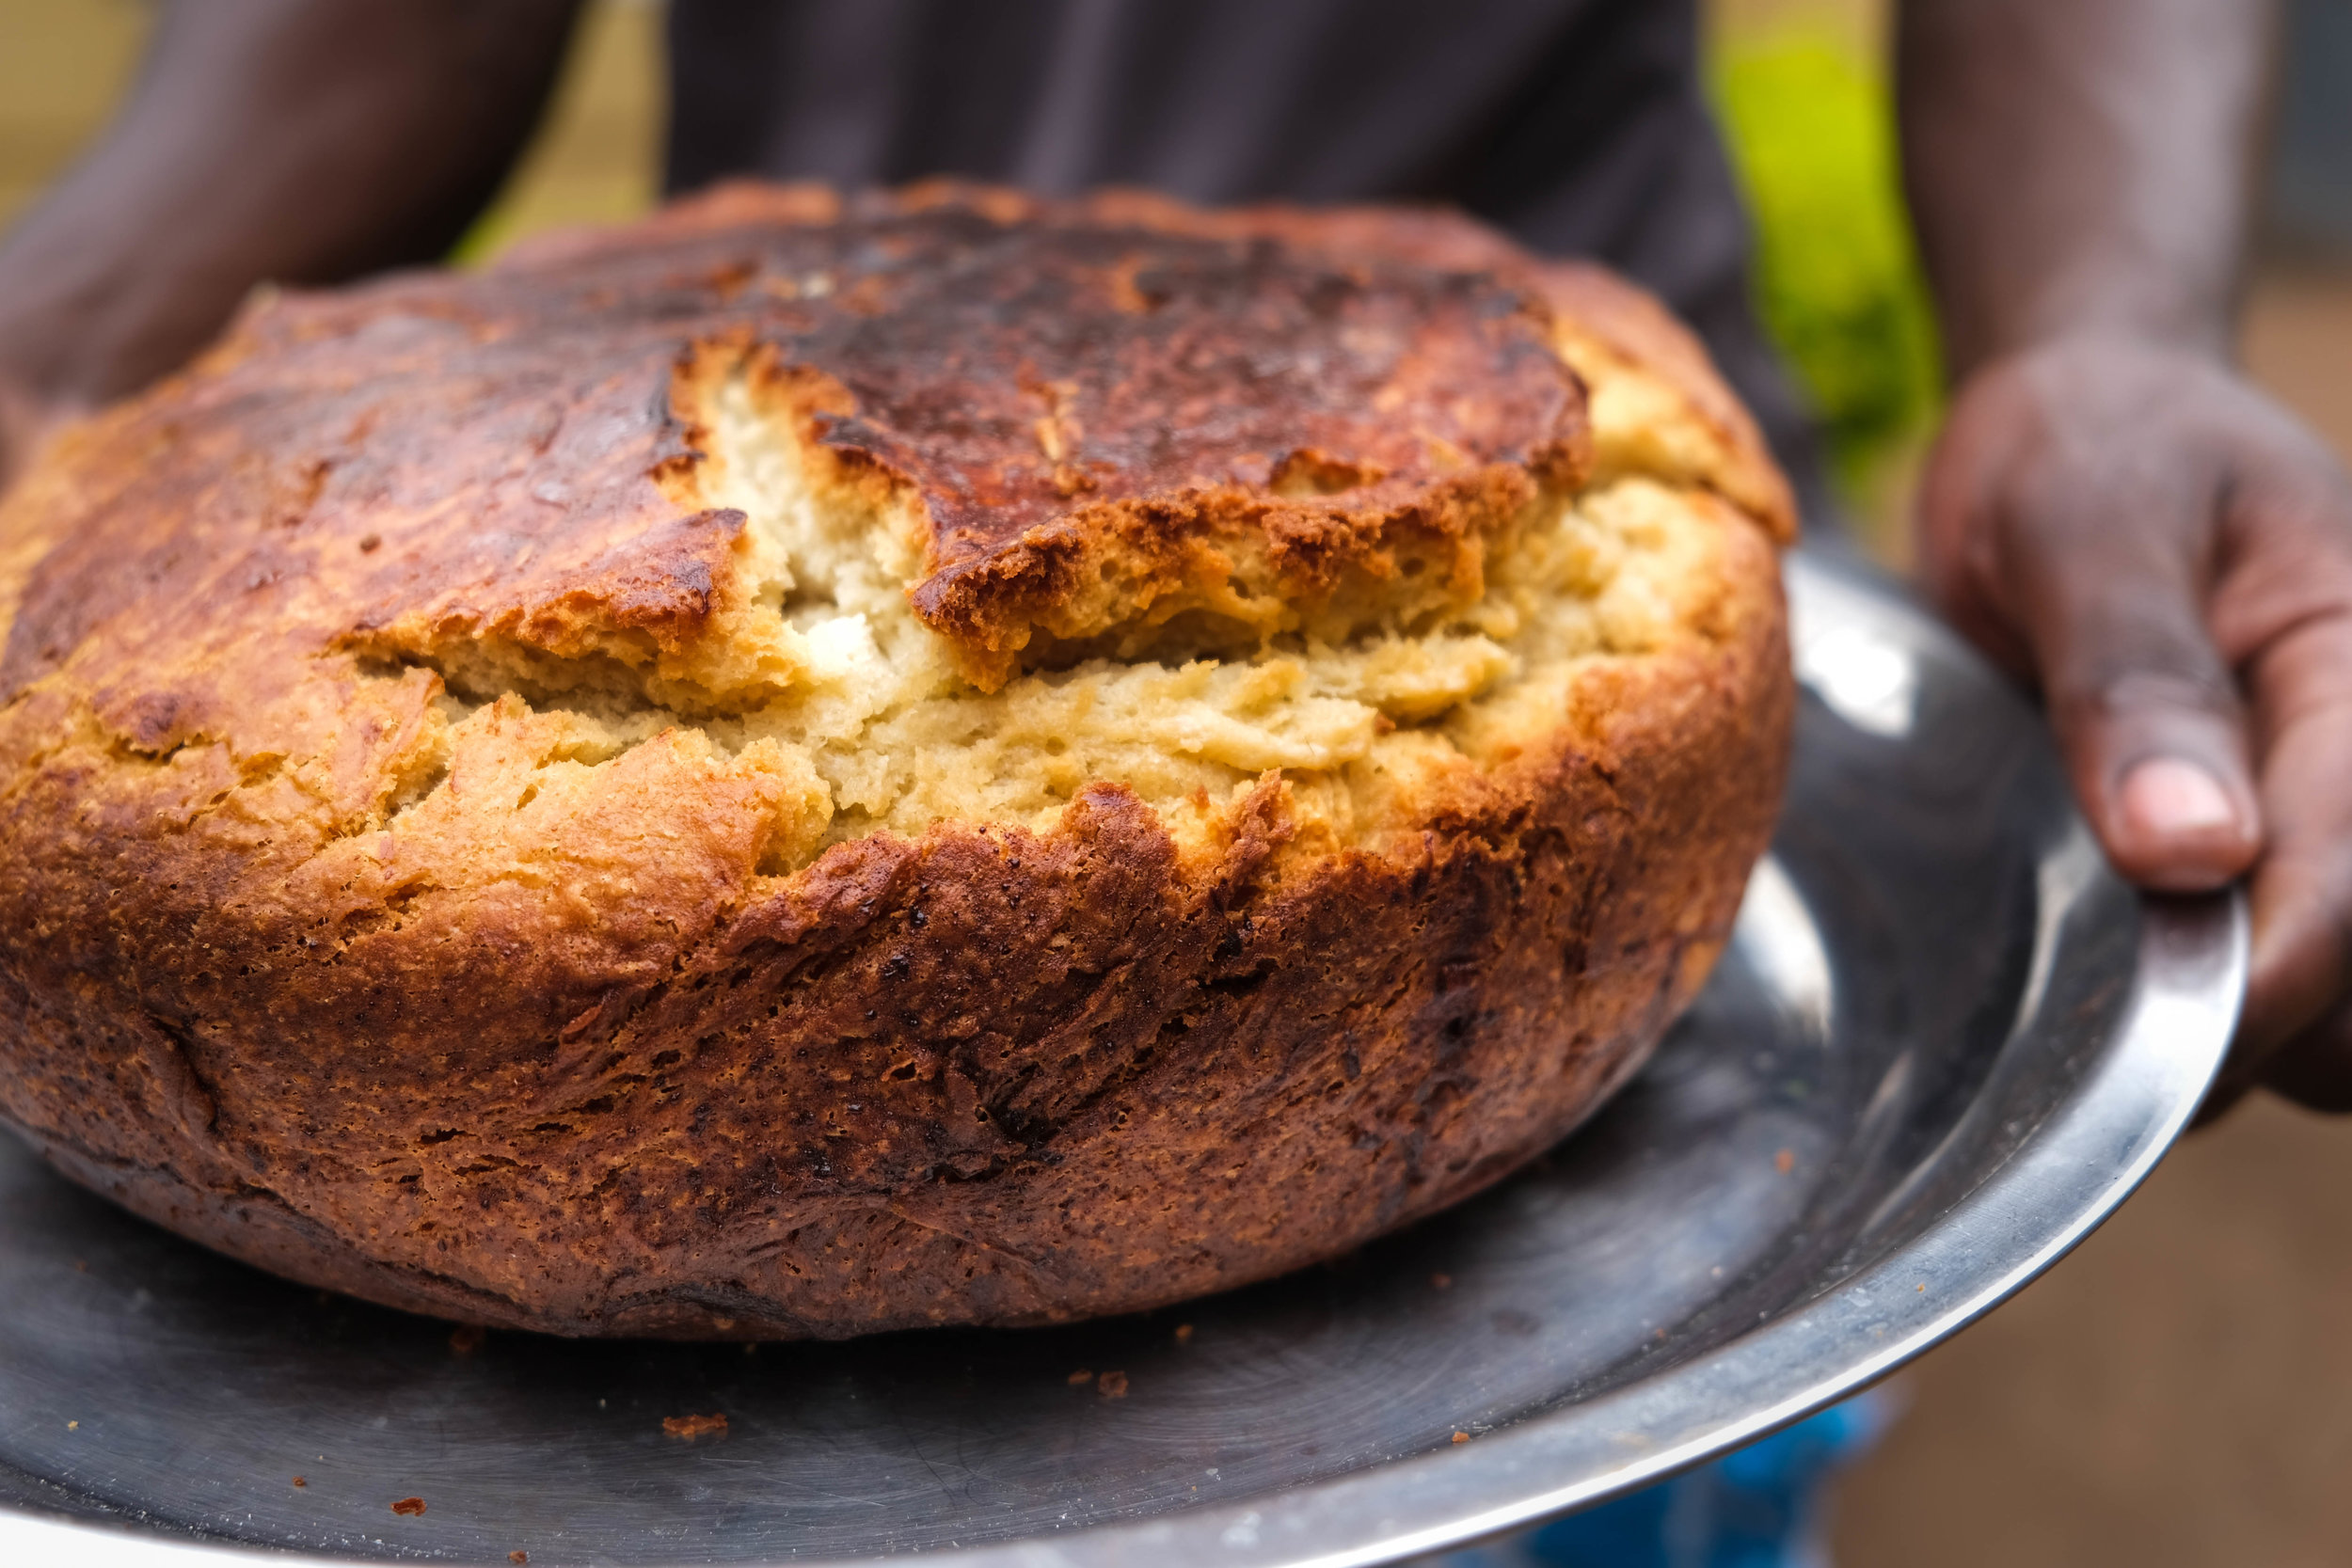  A Challah is freshly baked every week to celebrate Shabbat.  In many parts of  the world, Challah is a braided loaf of bread baked in an oven, but in Uganda, it is baked outside over charcoal and is equally delicious!   